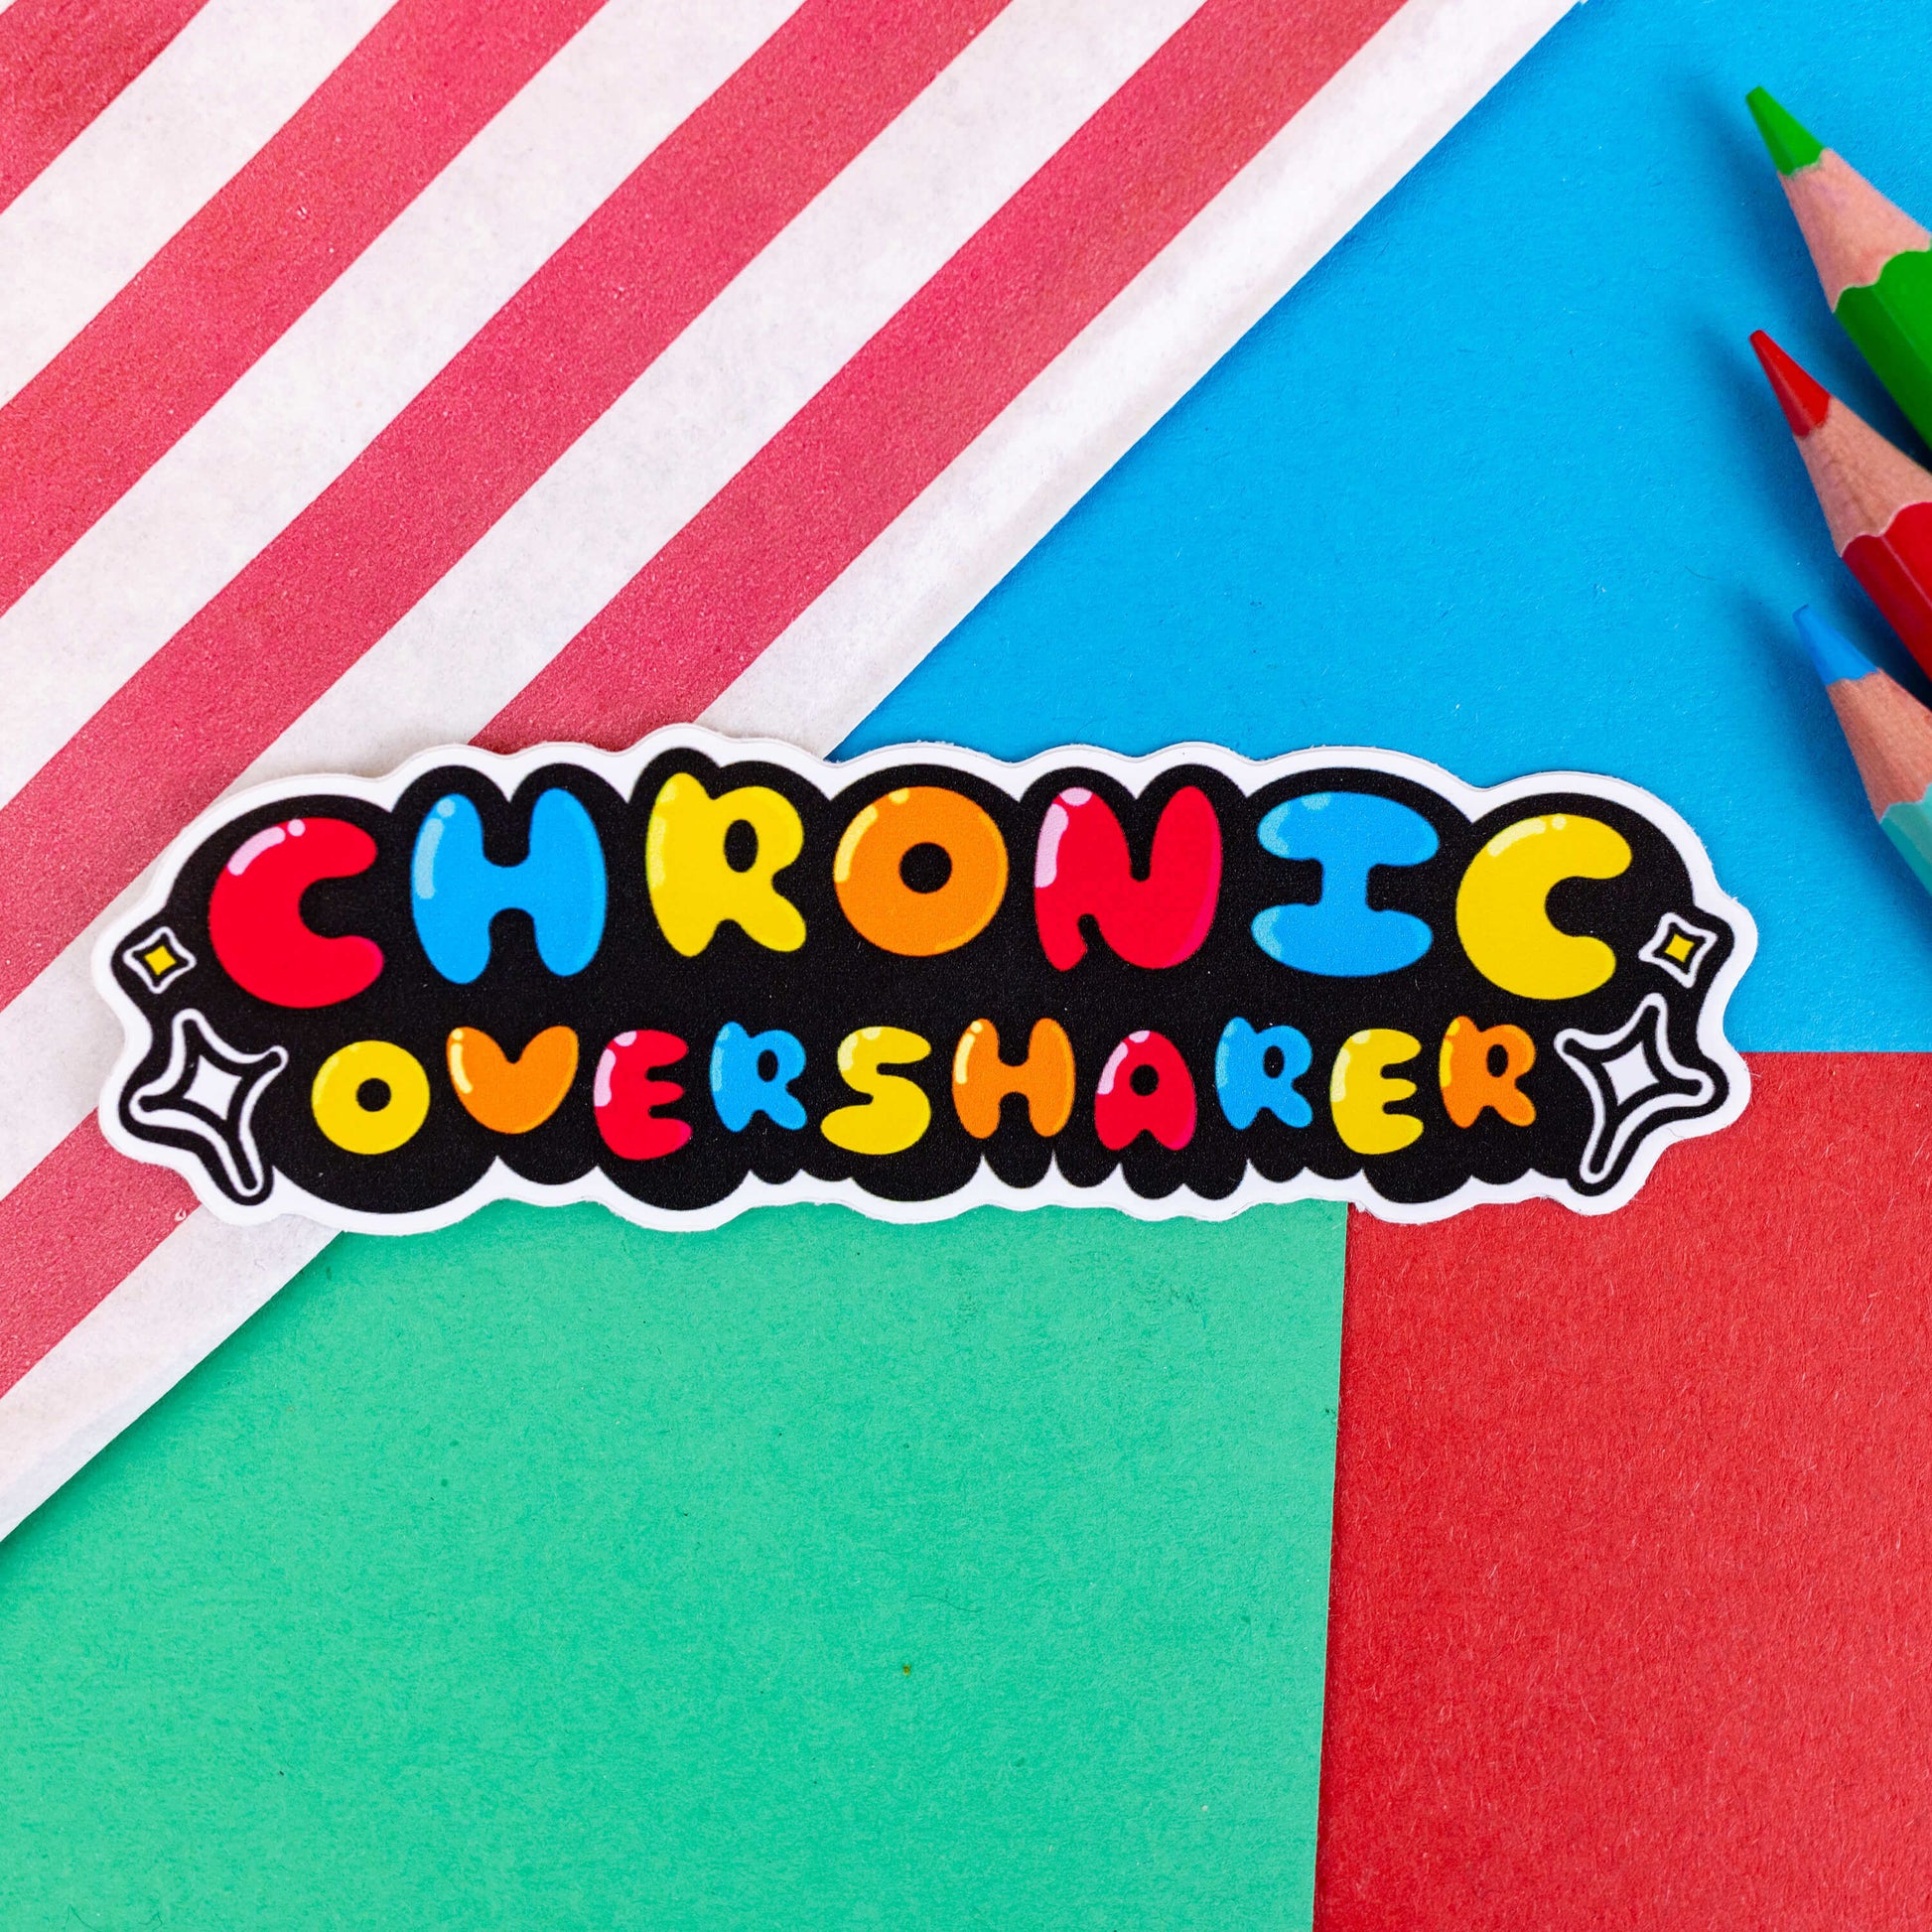 The Chronic Oversharer Sticker on a blue, green and red background with colouring pencils and a red stripe candy bag. The sticker is rainbow bubble font reading 'chronic oversharer' with a black drop shadow and white sparkles surrounding. The sticker was designed to raise awareness of neurodivergent disorders such as ADHD.